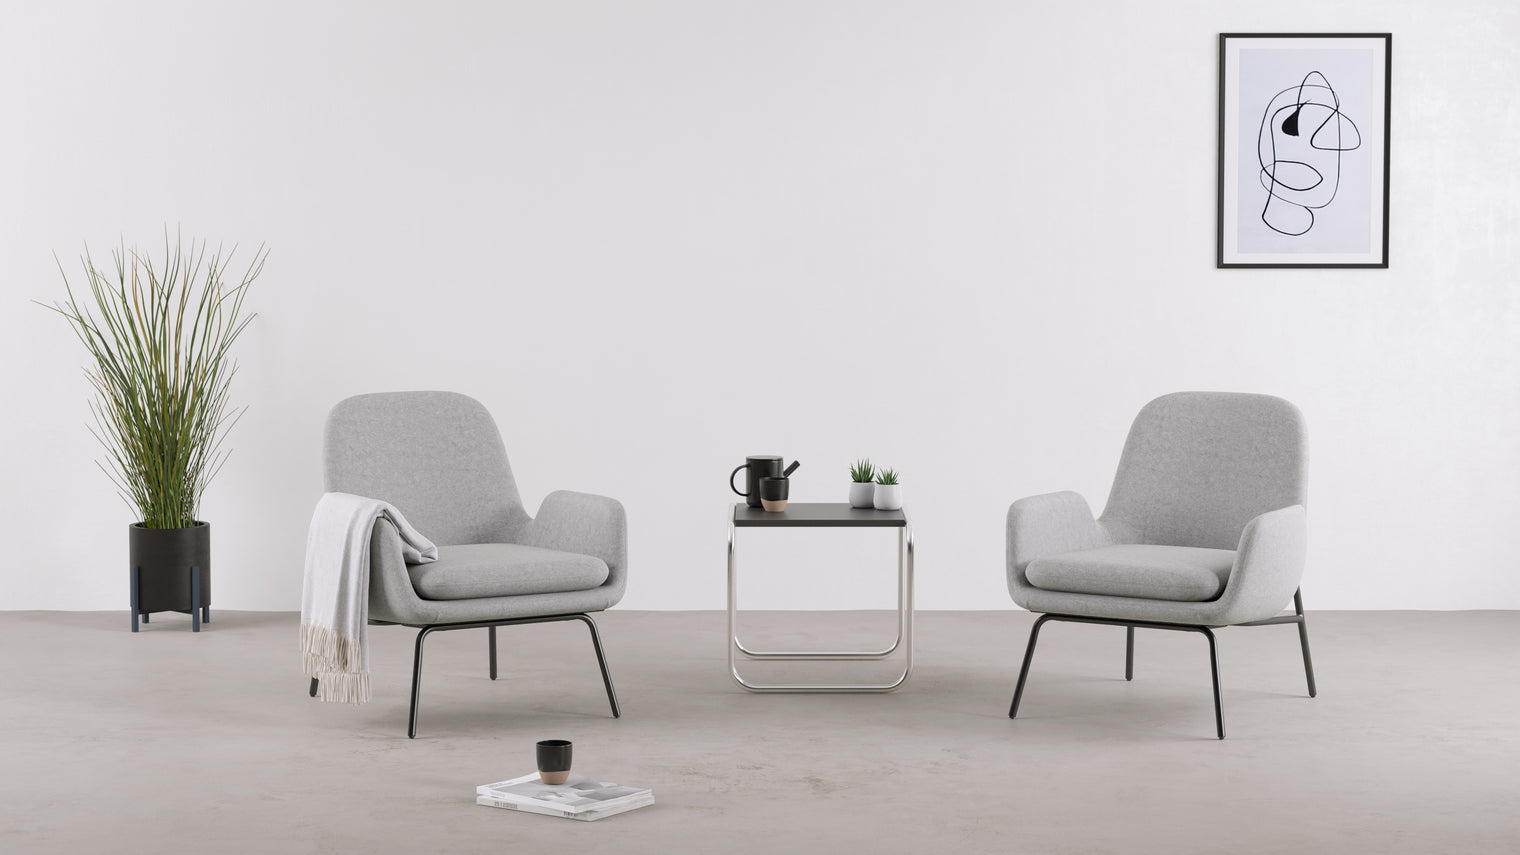 A TRUE PEOPLE-PLEASER | Unquestionably worthy of the highest praise, this simple but stylish seating solution offers endless hours of comfort, making it ideal for relaxing in your living room or reading nook.
